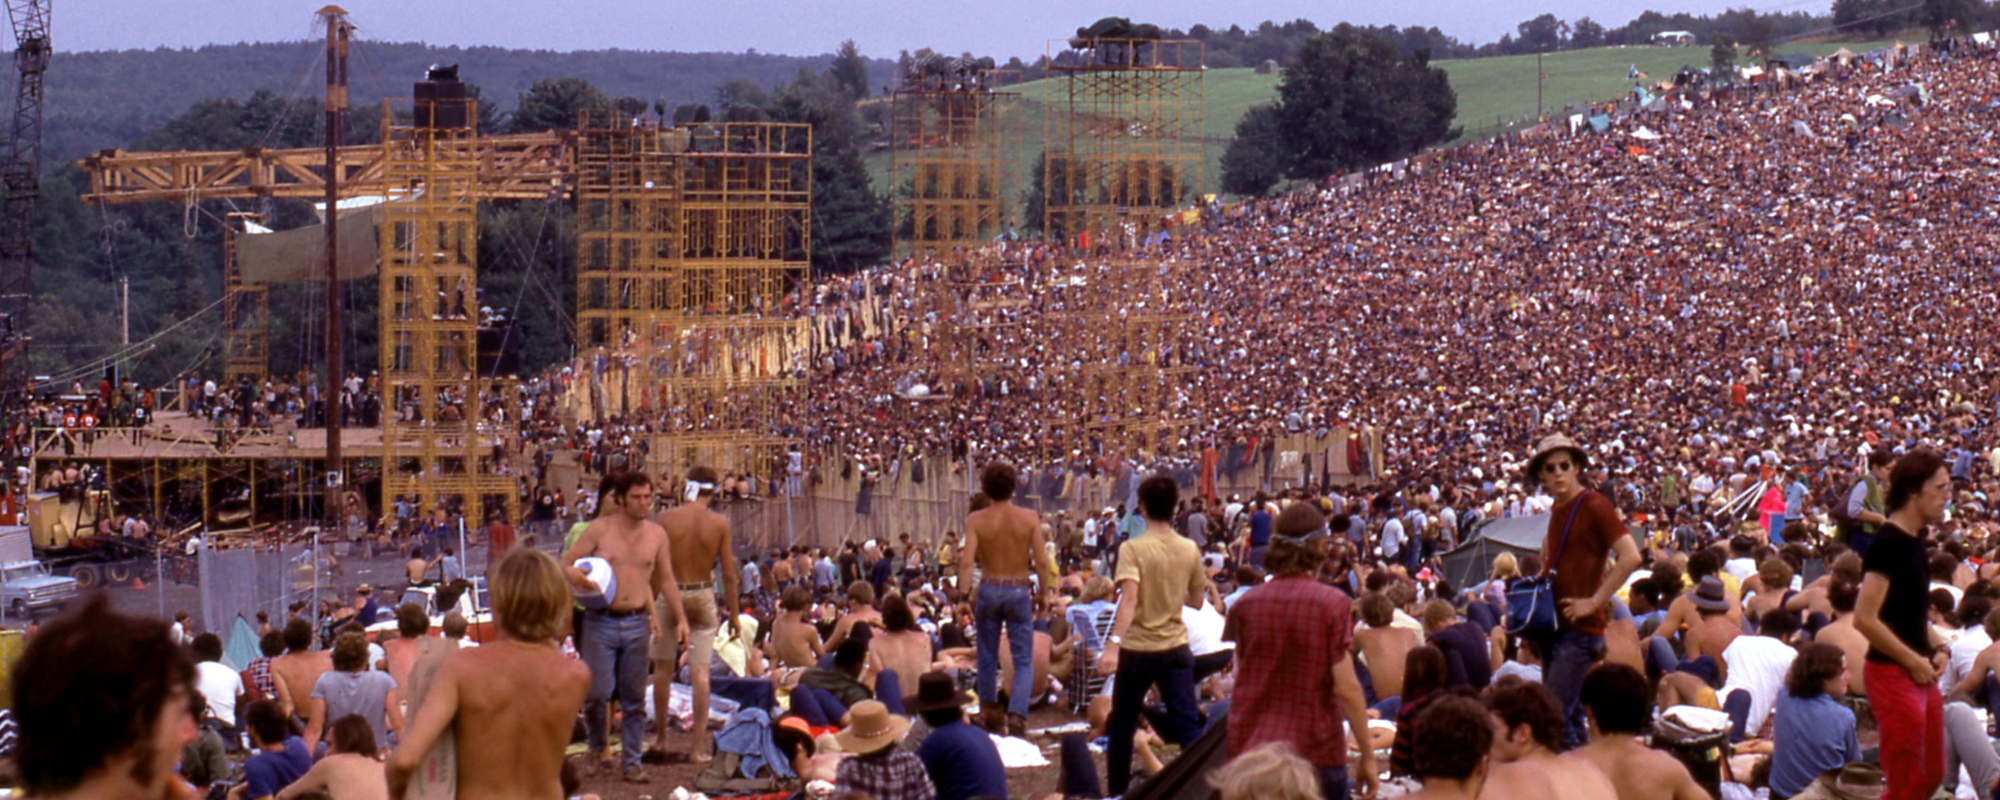 Remember When: Woodstock’s Chaotic and Muddy Aftermath (1969)